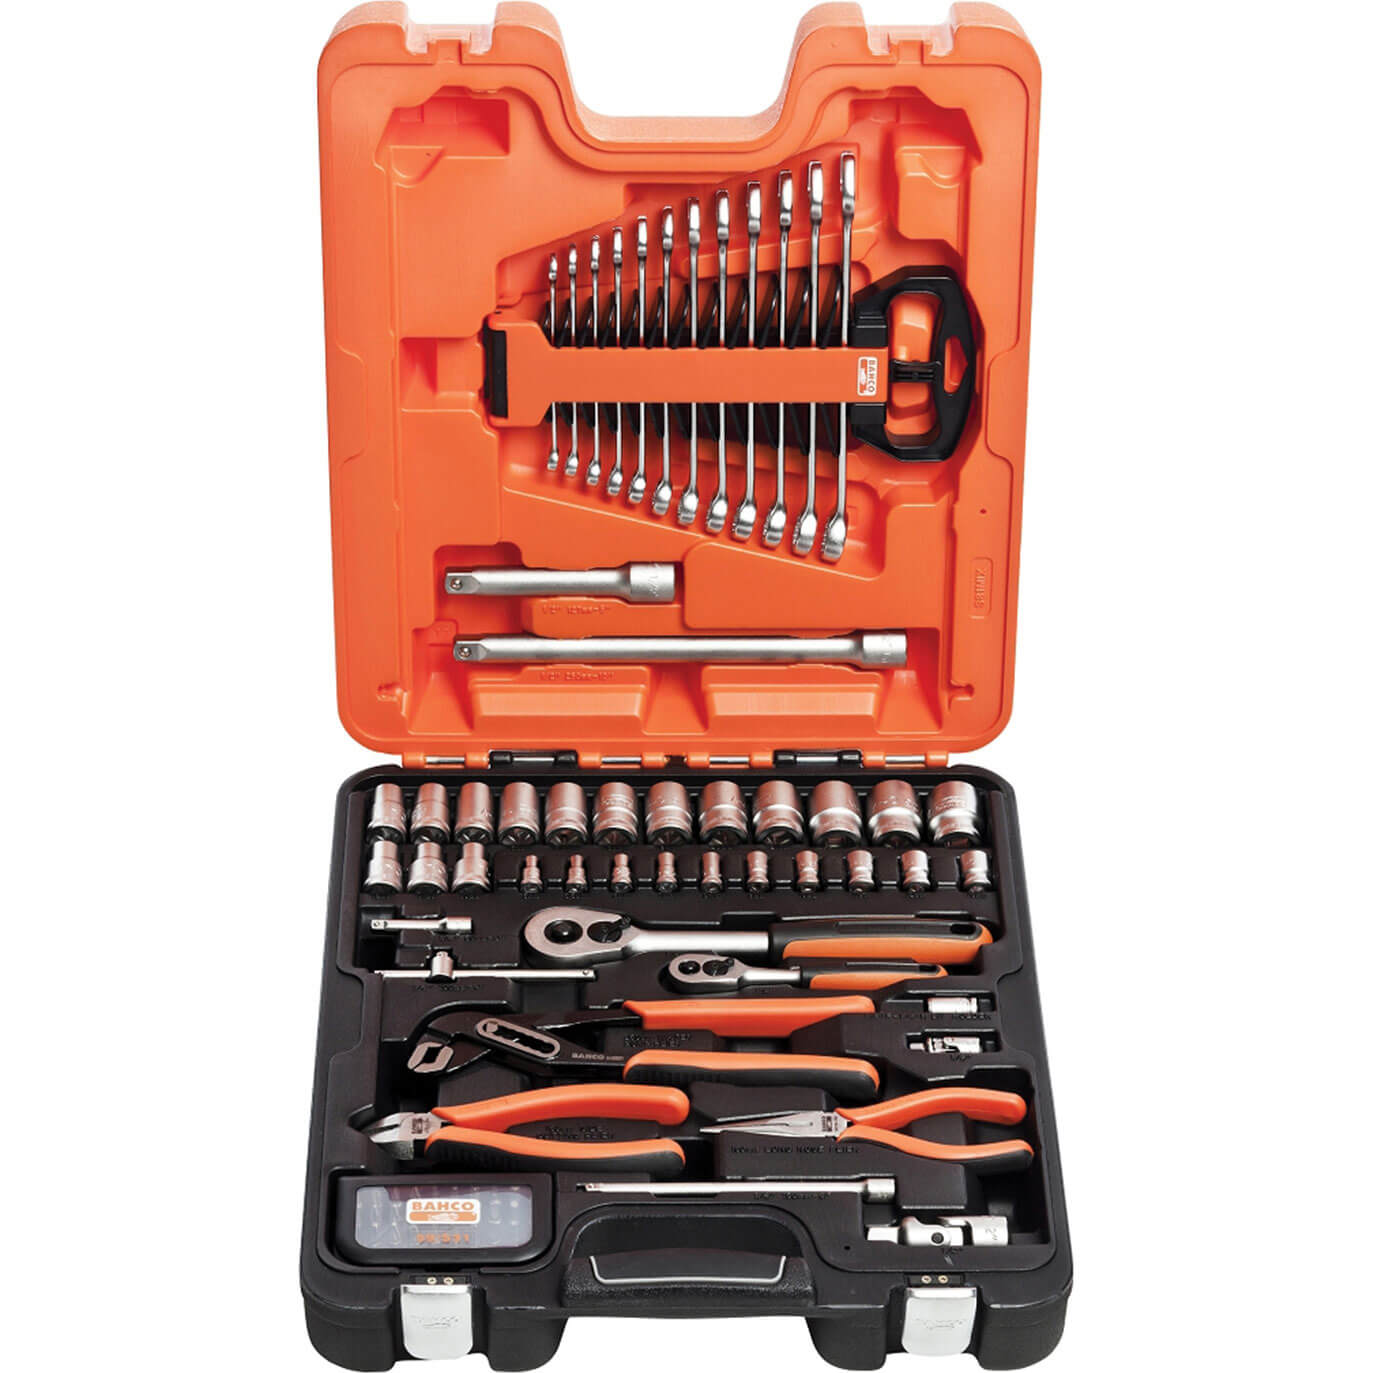 Bahco 81 Piece Combination Drive Hex Socket, Screwdriver Bit, Spanner and Pliers Set Metric Combination